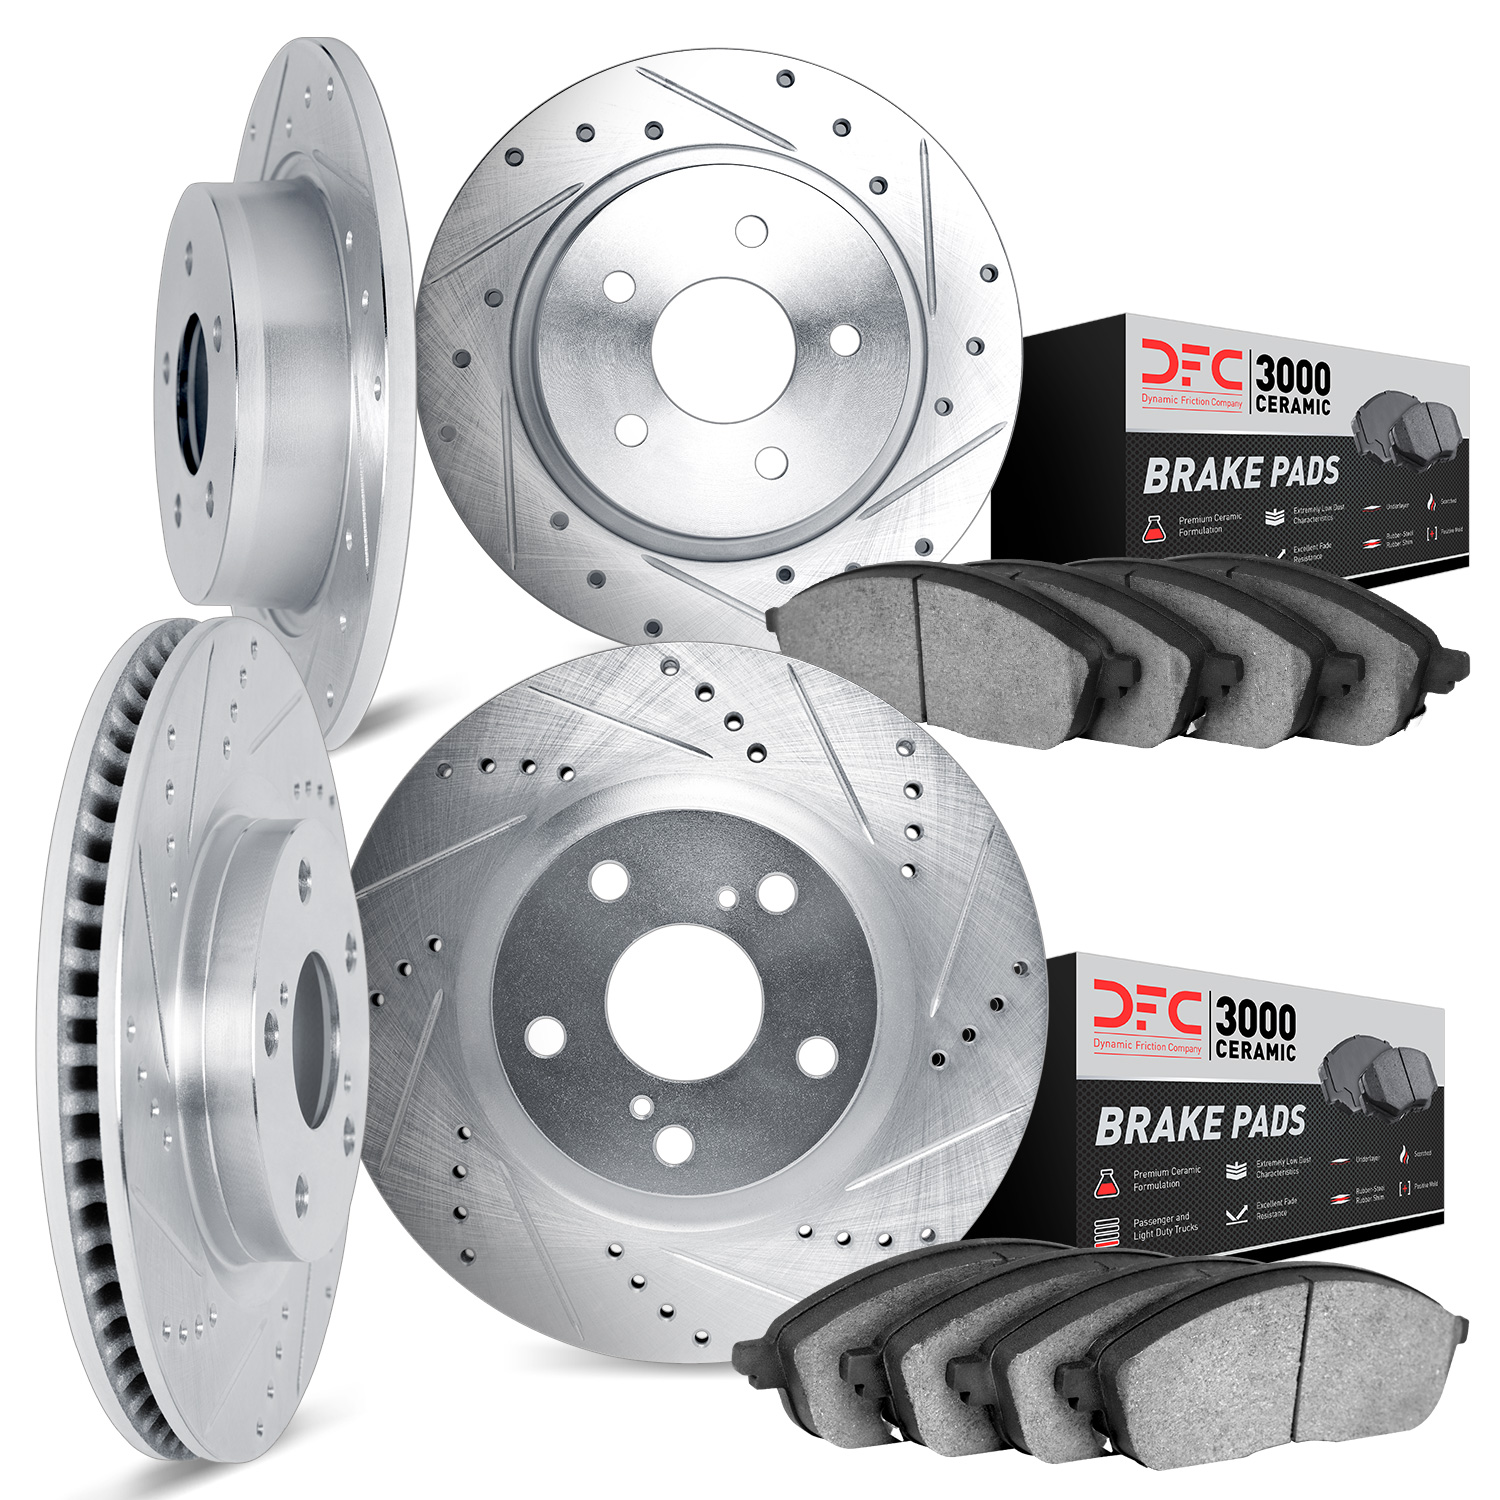 7304-54027 Drilled/Slotted Brake Rotor with 3000-Series Ceramic Brake Pads Kit [Silver], 1995-2001 Ford/Lincoln/Mercury/Mazda, P